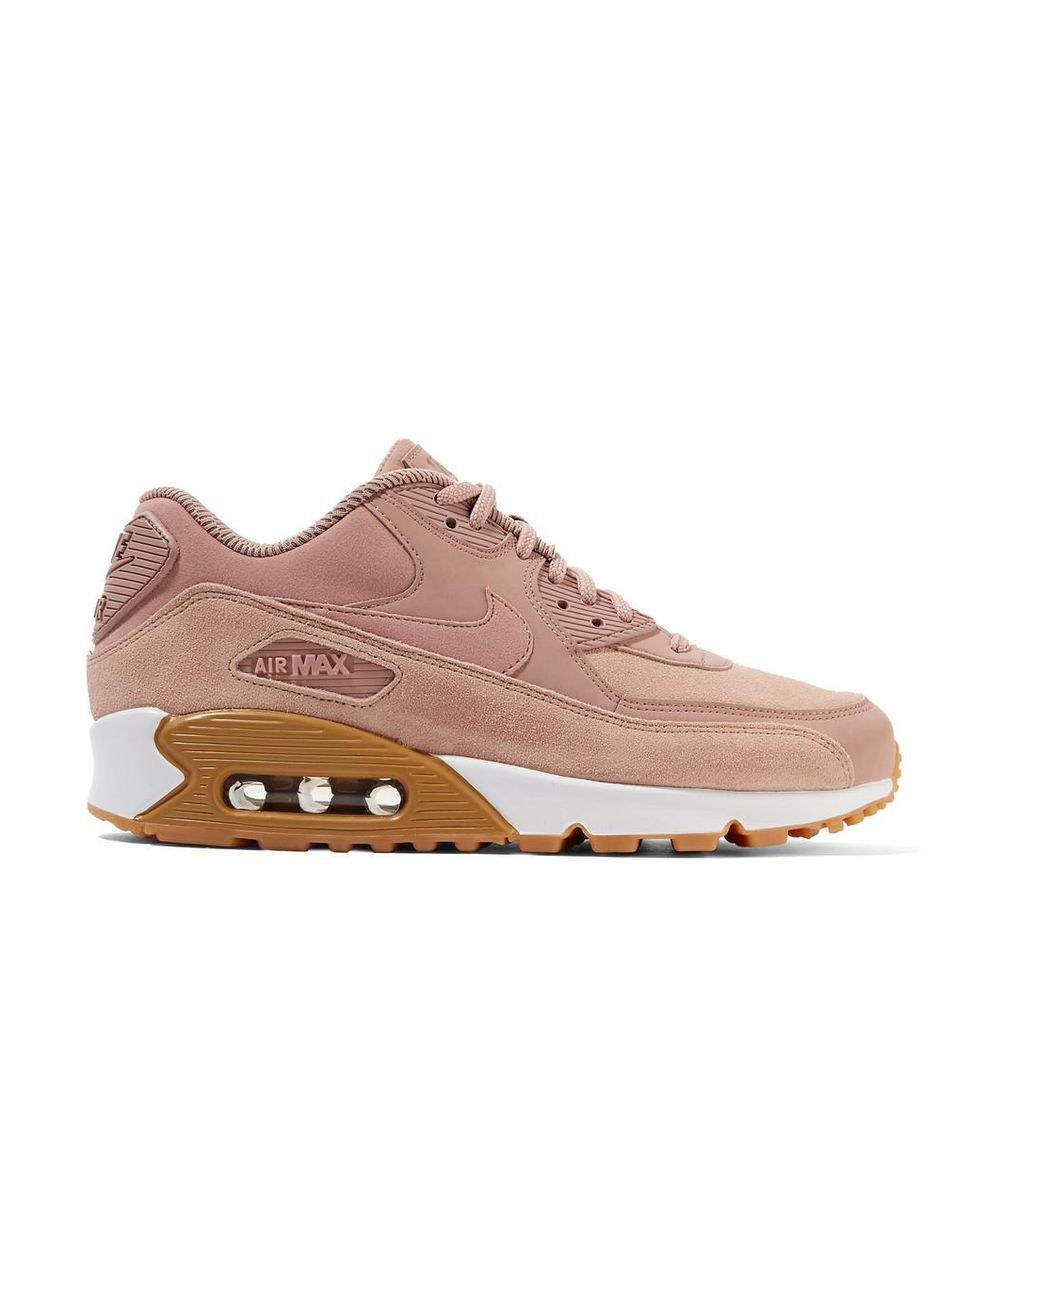 Nike Air Max 90 Suede-trimmed Leather Sneakers in Antique Rose (Pink) | Lyst